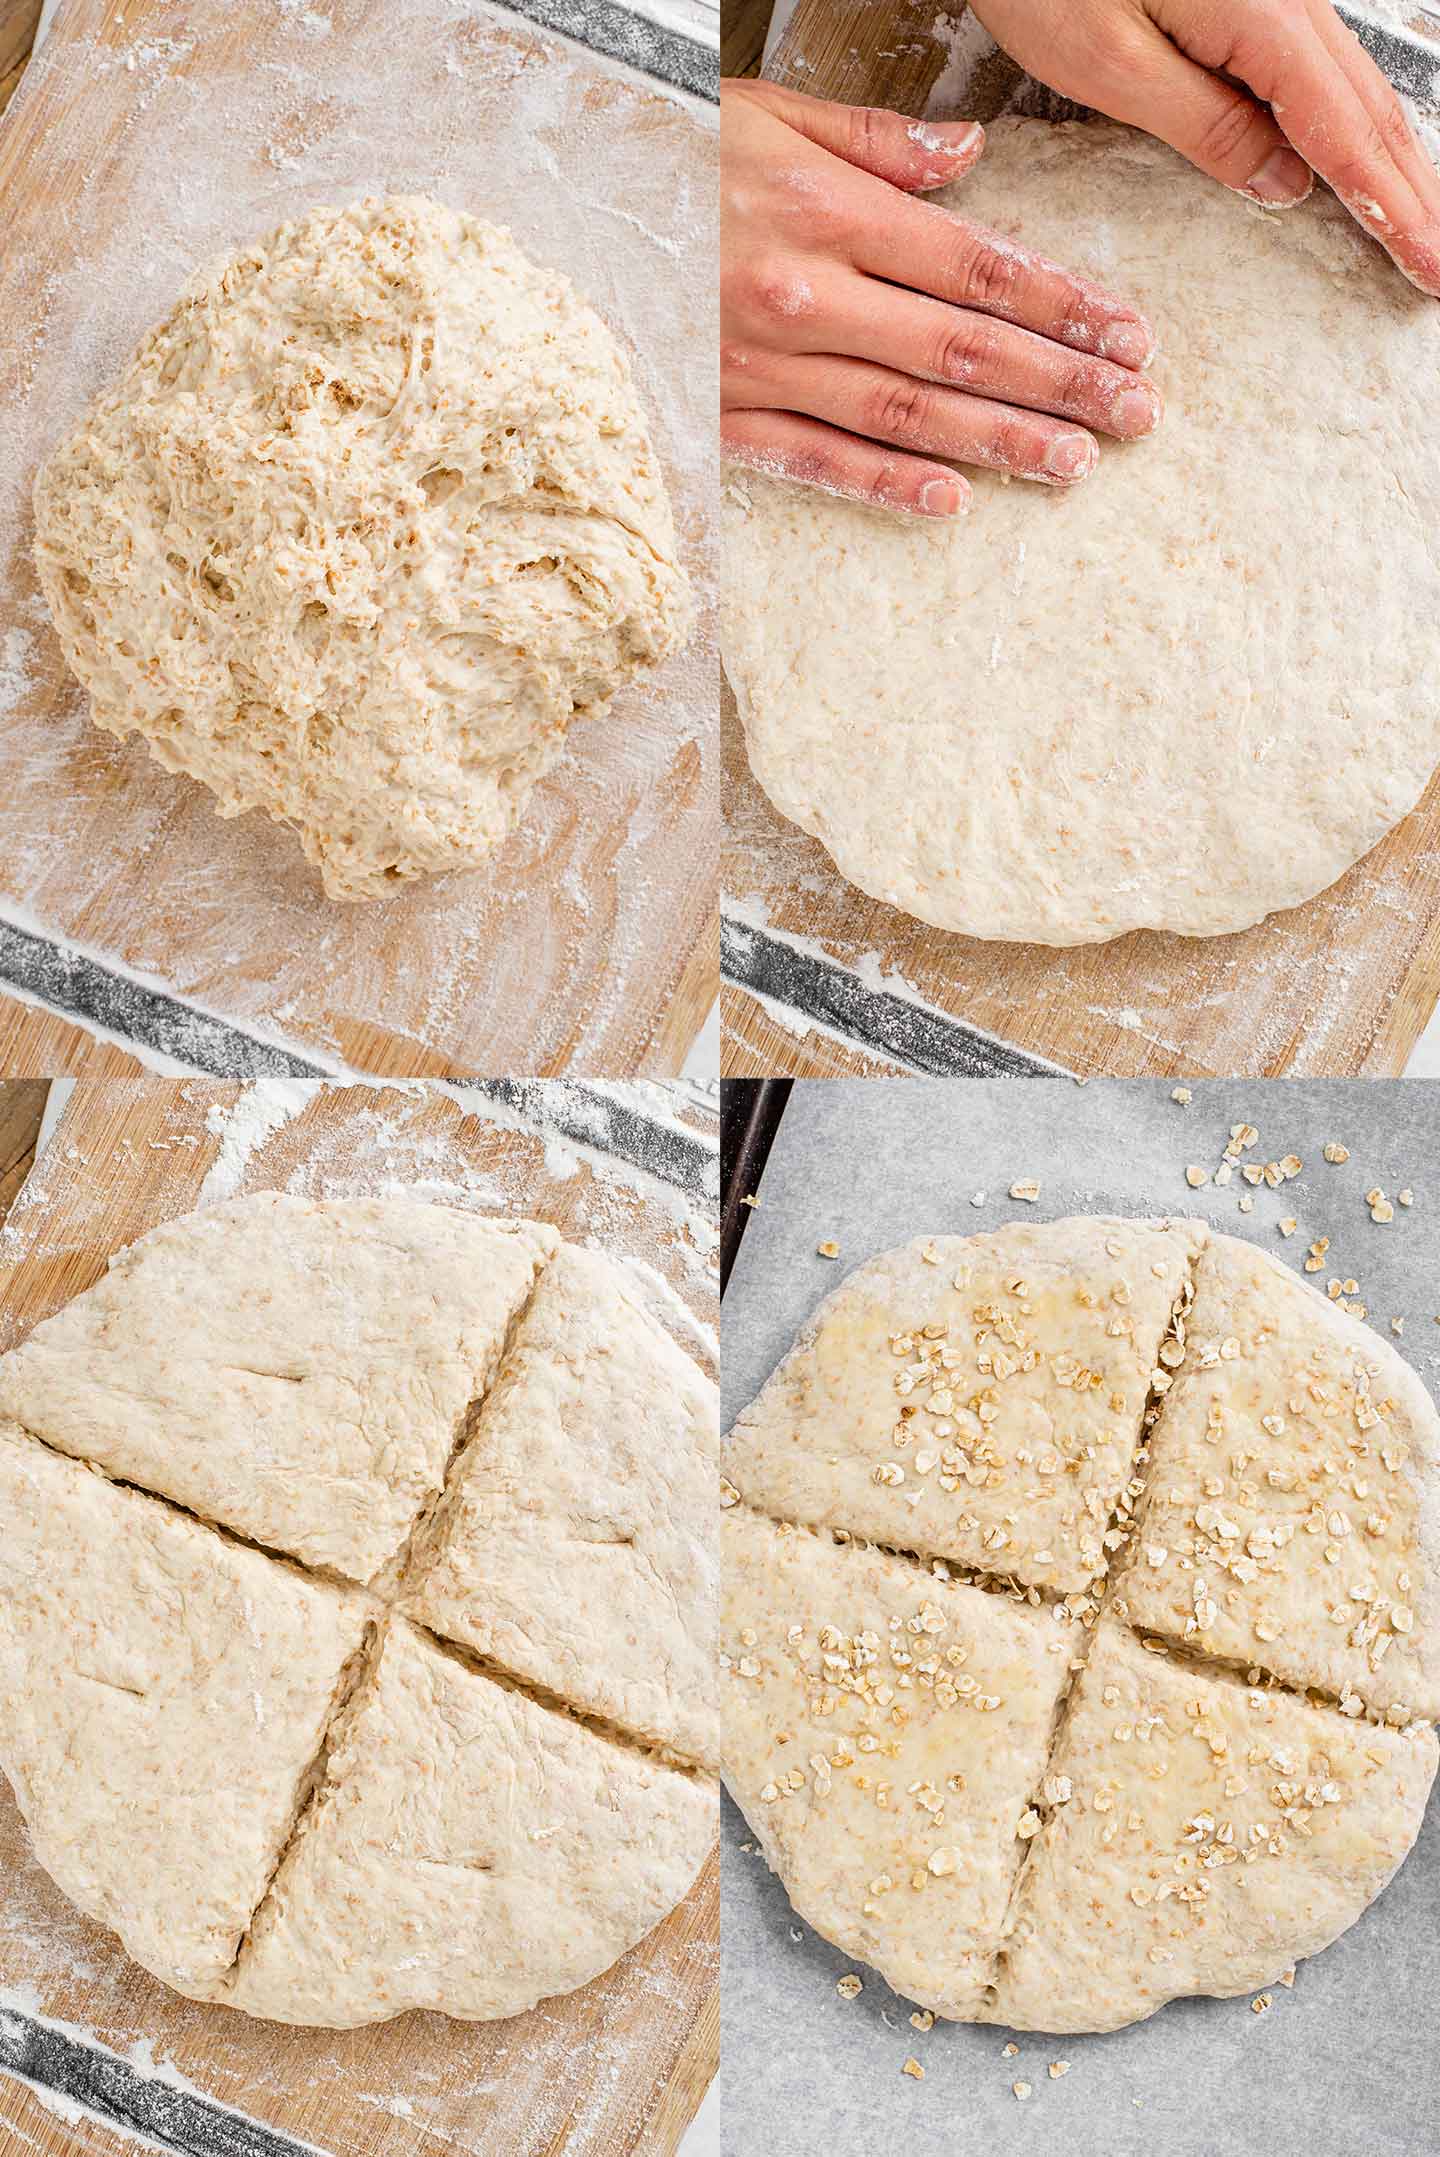 Grid of four process photos. Sticky dough atop a floured cutting board, hands flatten the dough into a disc, a deep cross is cut into the dough, the dough is placed on a lined baking sheet and sprinkled with oats.